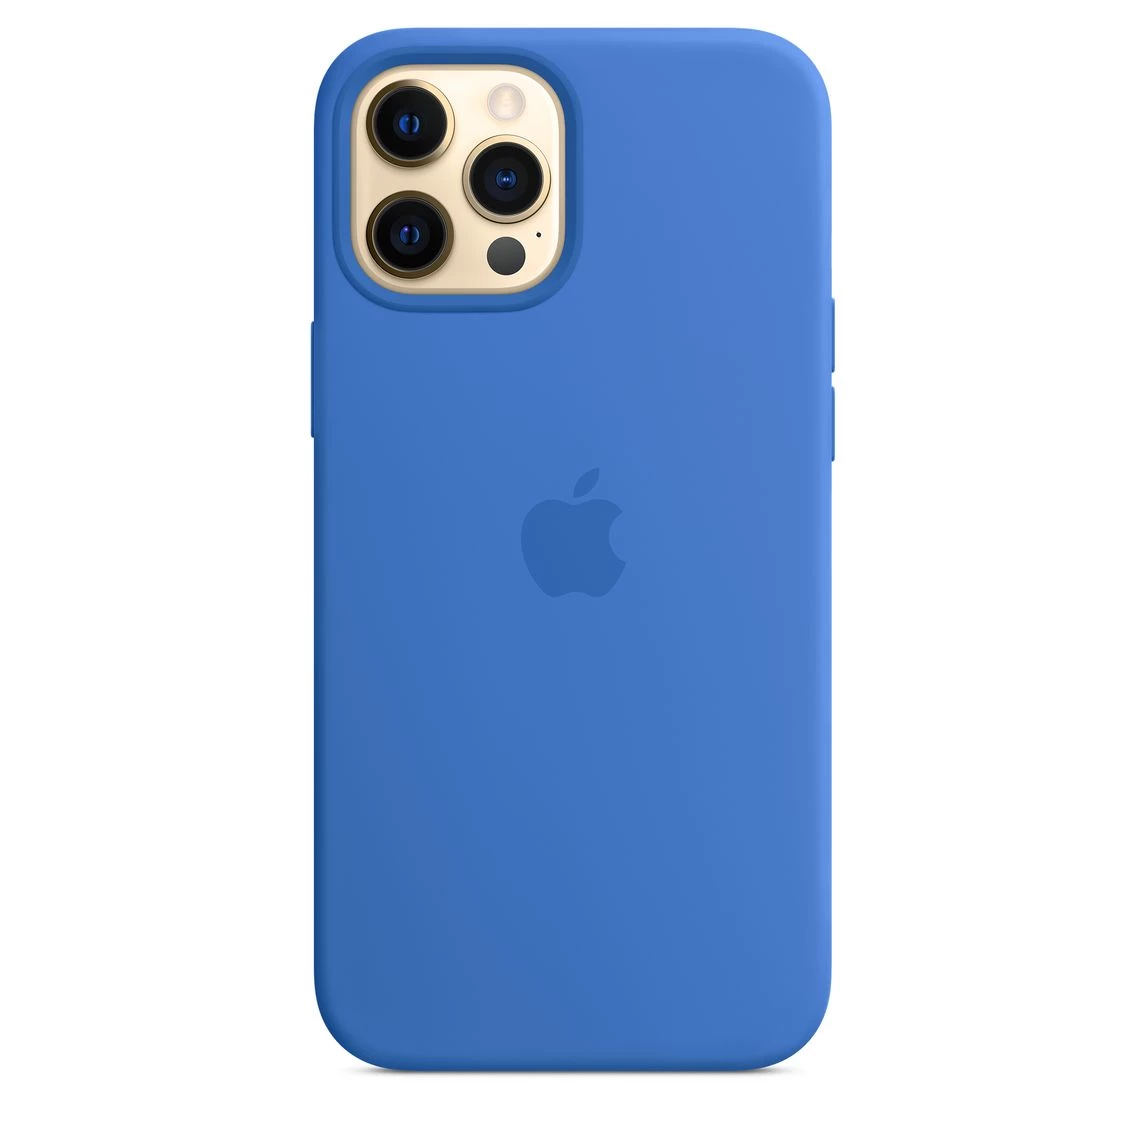 Apple iPhone 12 Pro Max Silicone Case with MagSafe - Capri Blue (MK043)